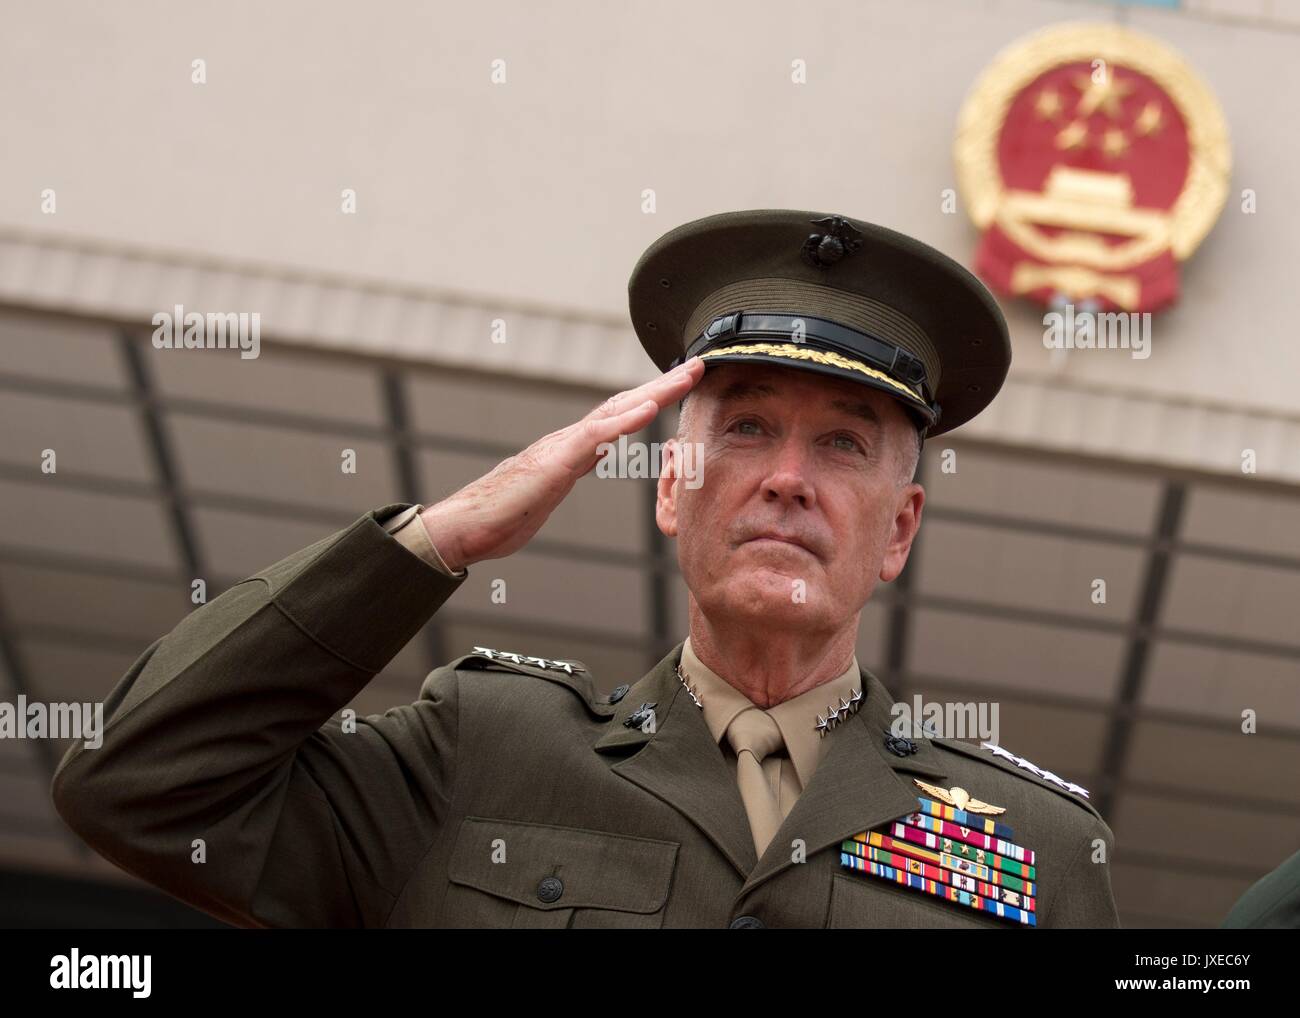 Beijing, China. 15th Aug, 2017. U.S. Chairman of the Joint Chiefs Gen. Joseph Dunford salutes during a red carpet arrival ceremony at the Bayi building August 15, 2017 in Beijing, China. Dunford and Fang signed an agreement to strengthen communication between the two militaries amid tensions concerning North Korea. Credit: Planetpix/Alamy Live News Stock Photo